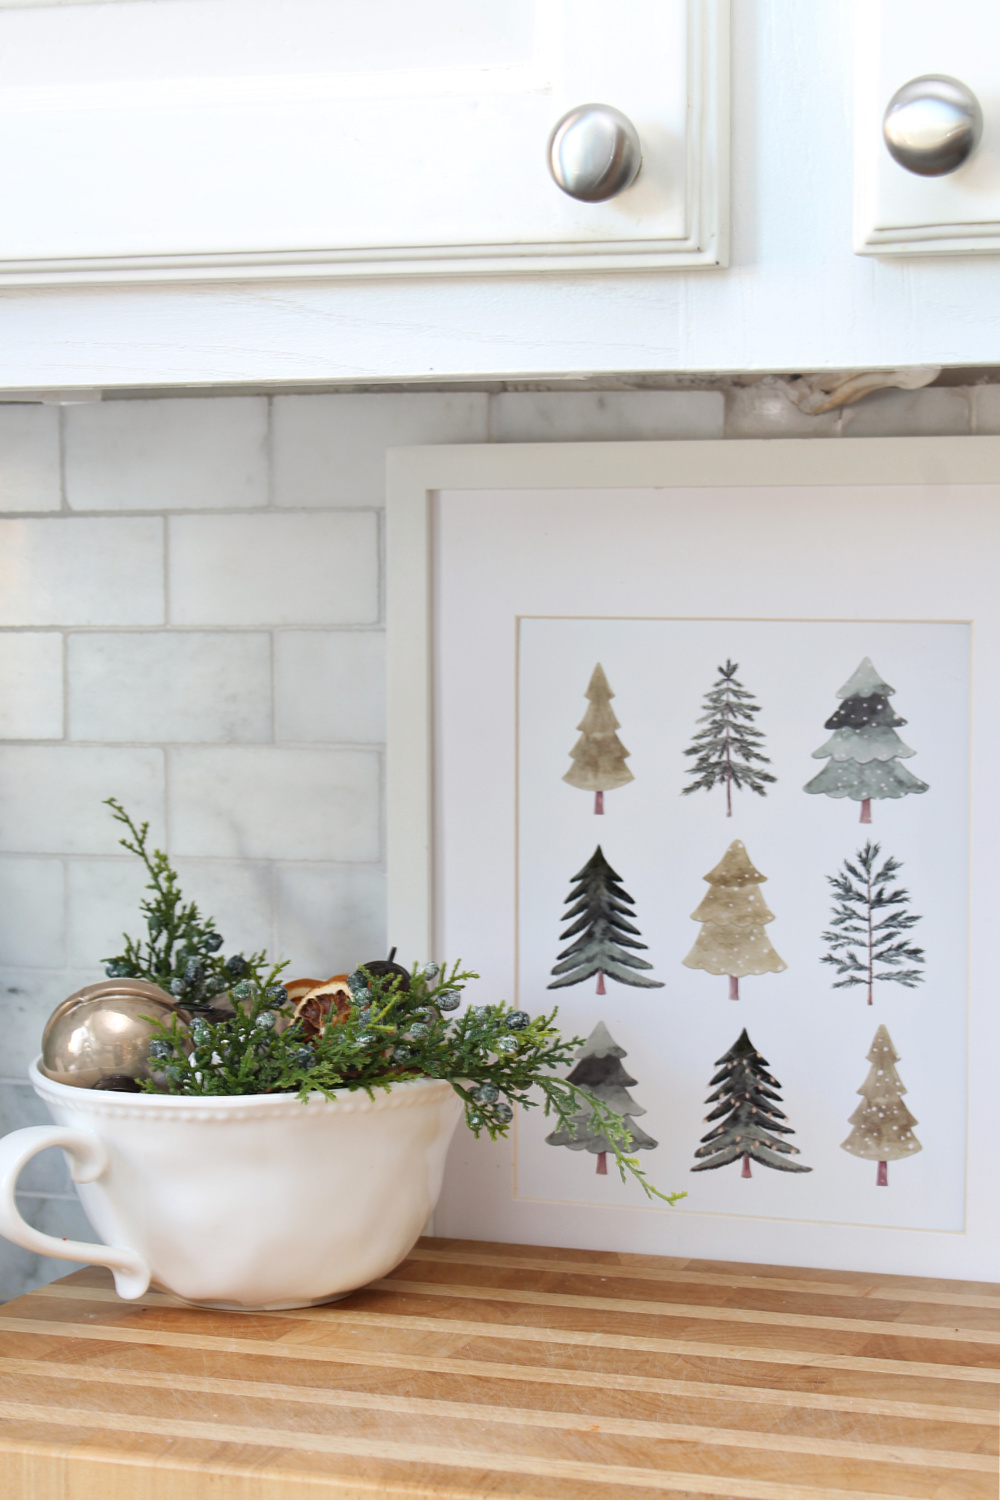 Christmas tree art free printable in a frame.